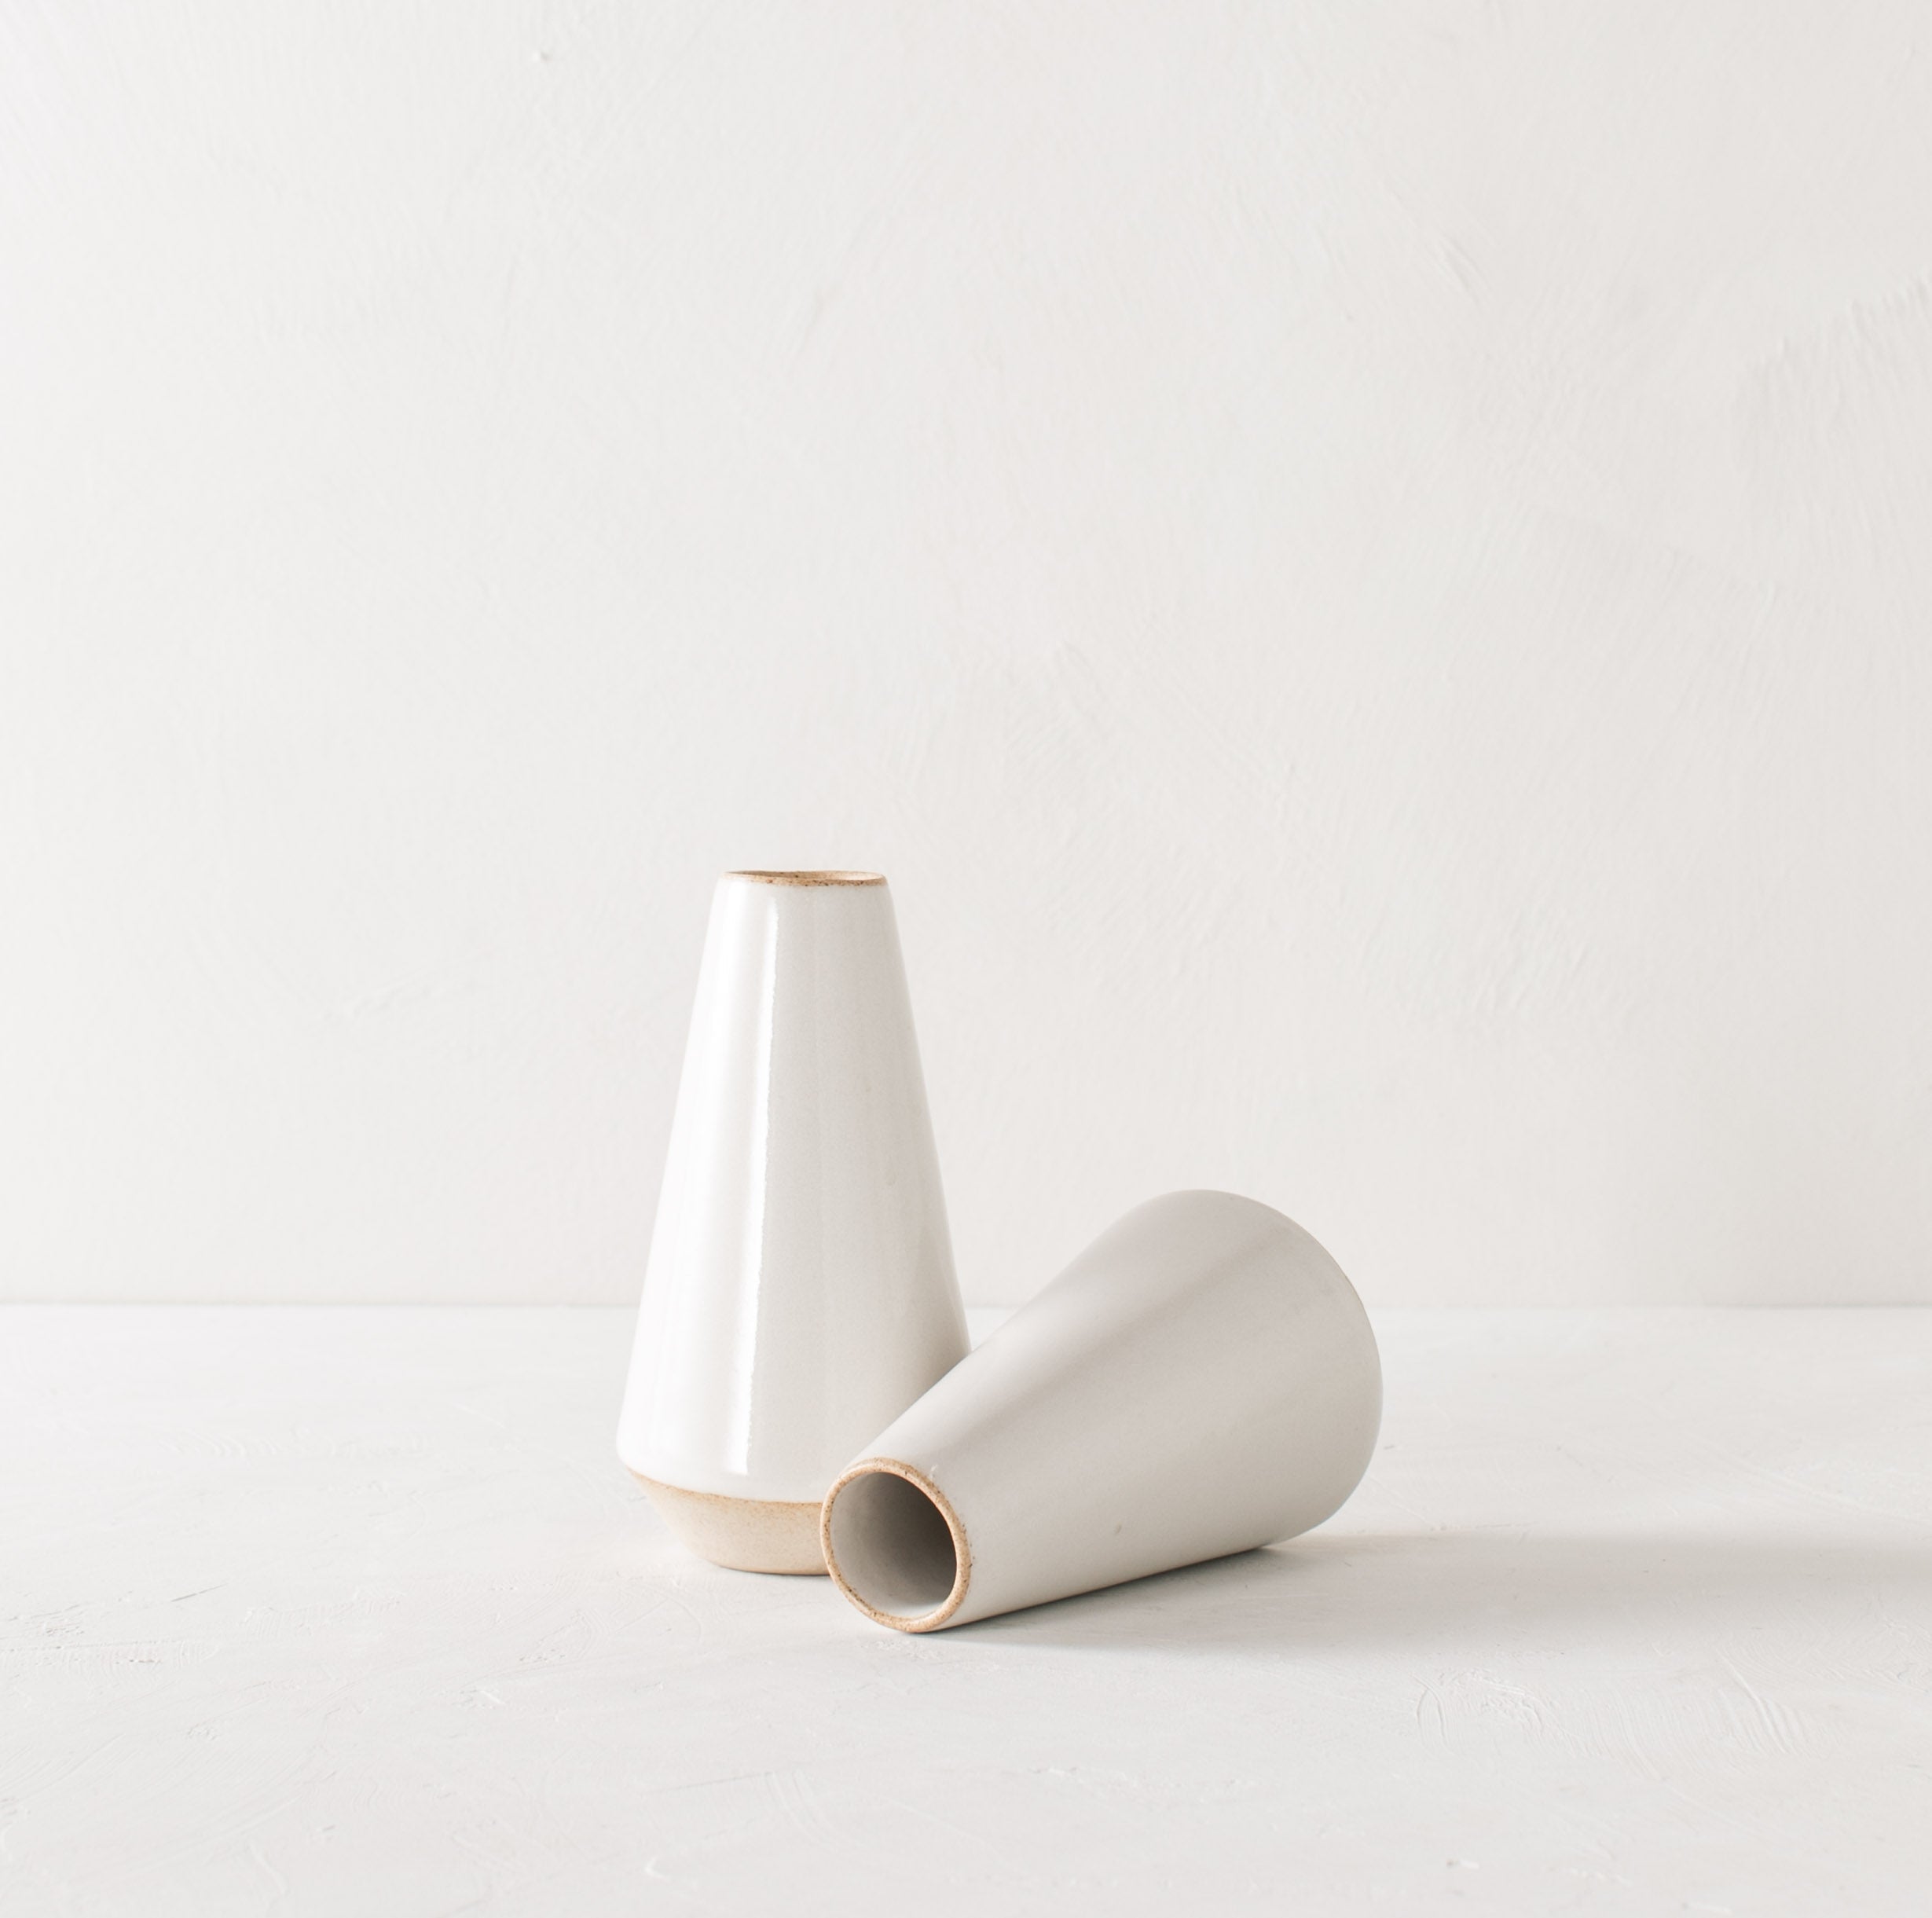 Two minimal white 7 inch tapered bud vases. White glazed with an exposes stoneware rim and base. One upright while the other lays on its side. Handmade ceramic bud vase designed and sold by Convivial Production, Kansas City Ceramics.